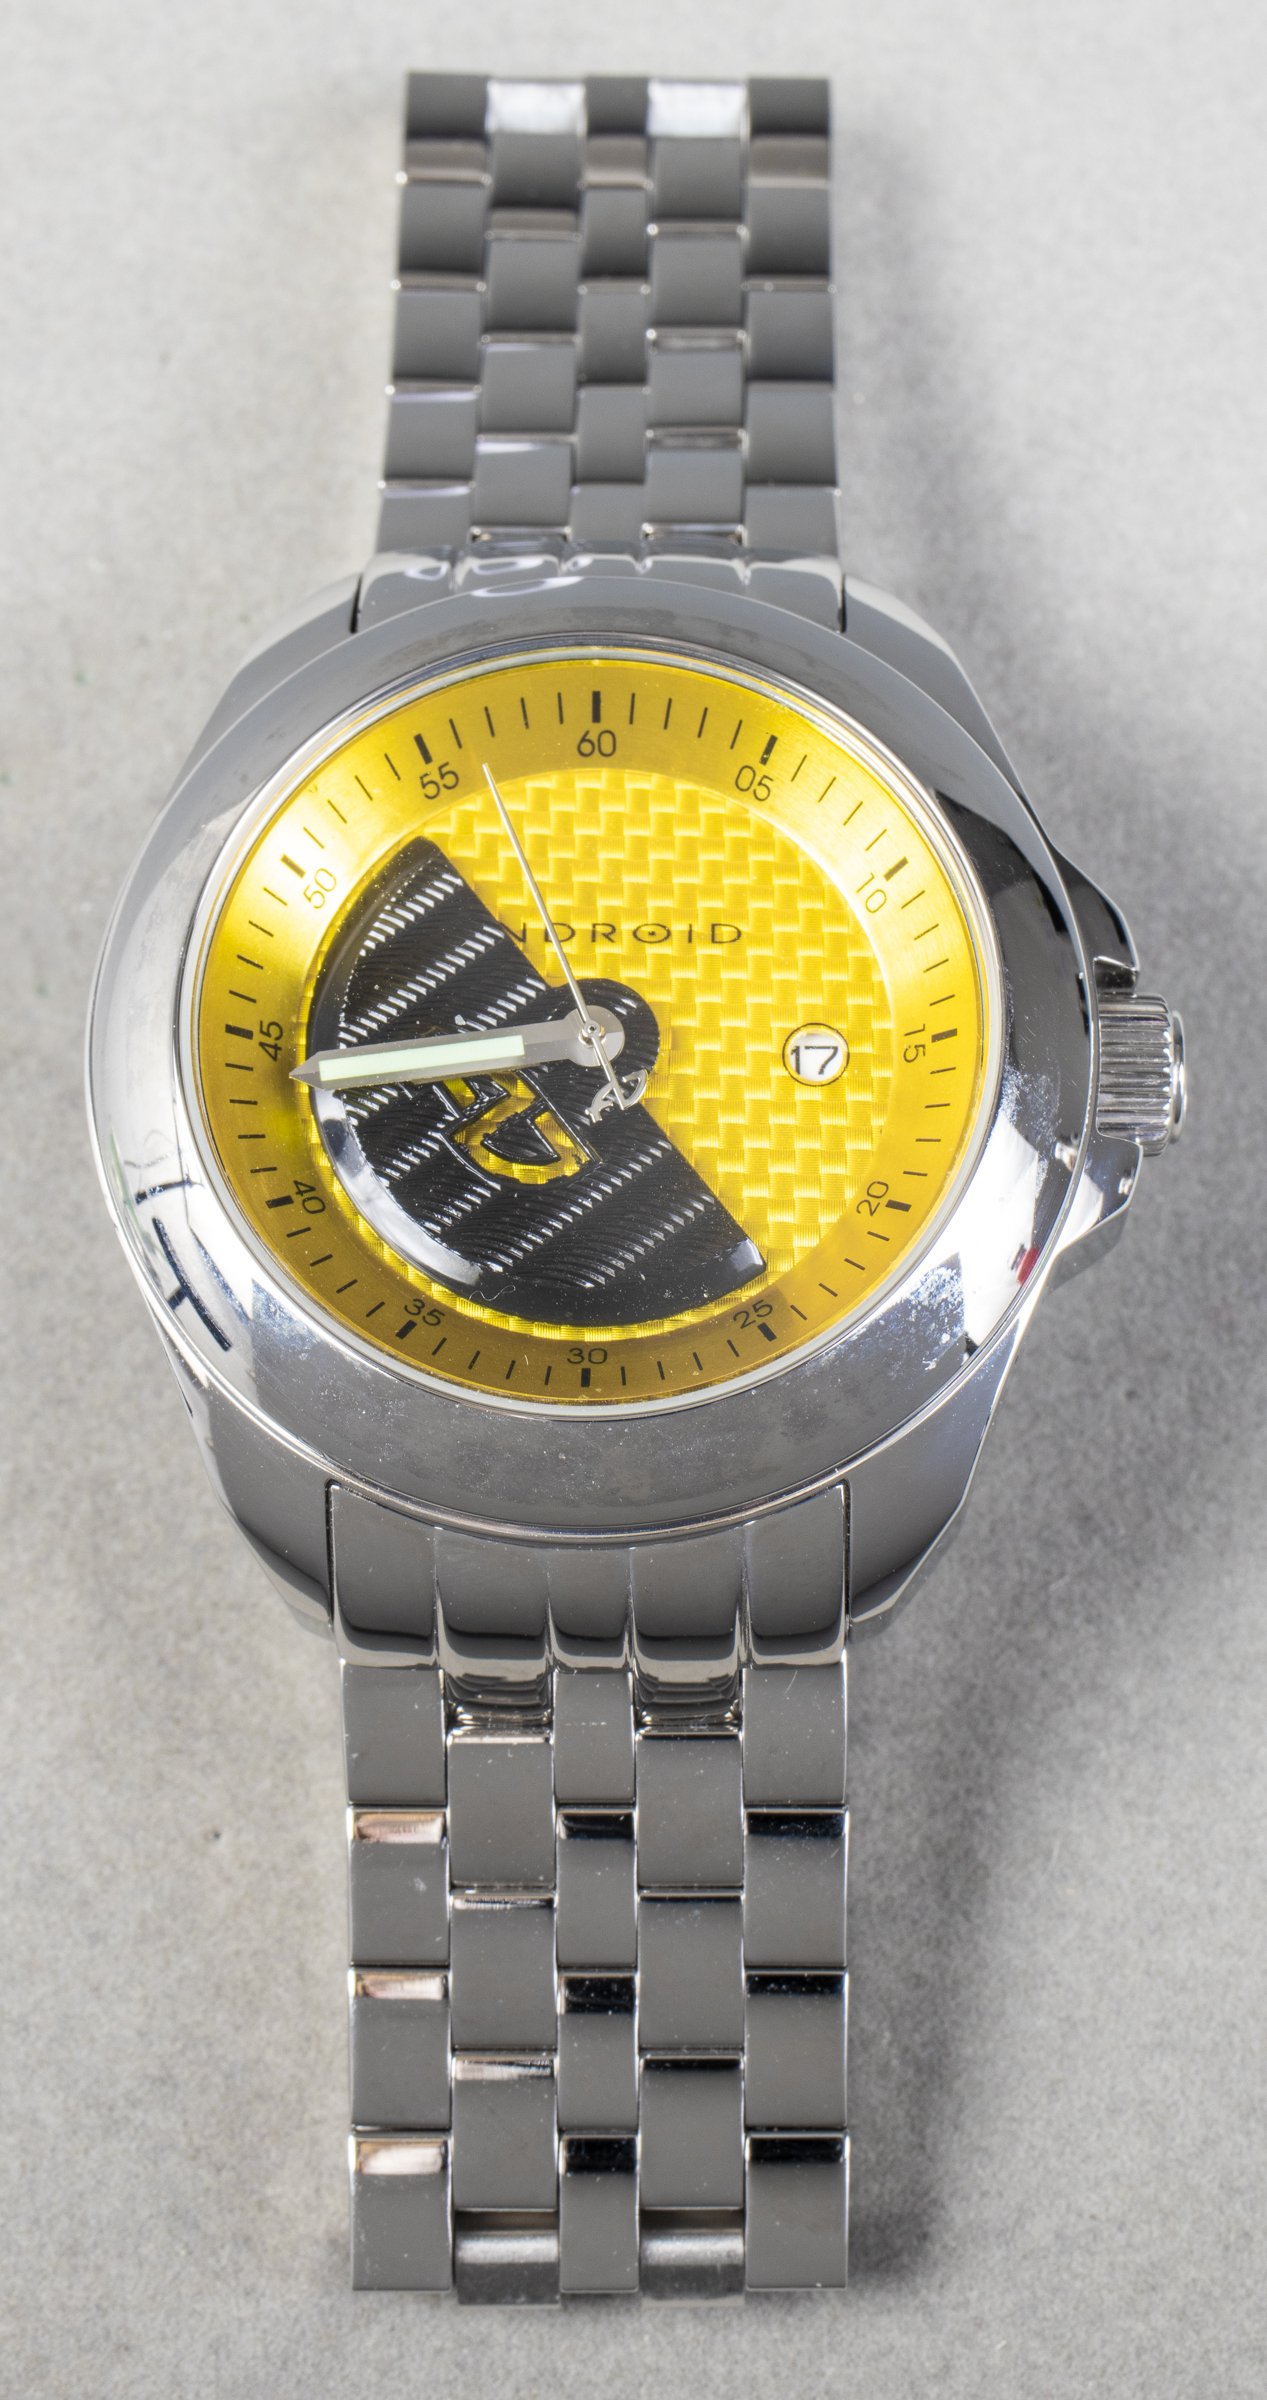 ANDROID "ROTATOR" LIMITED ED. WATCH